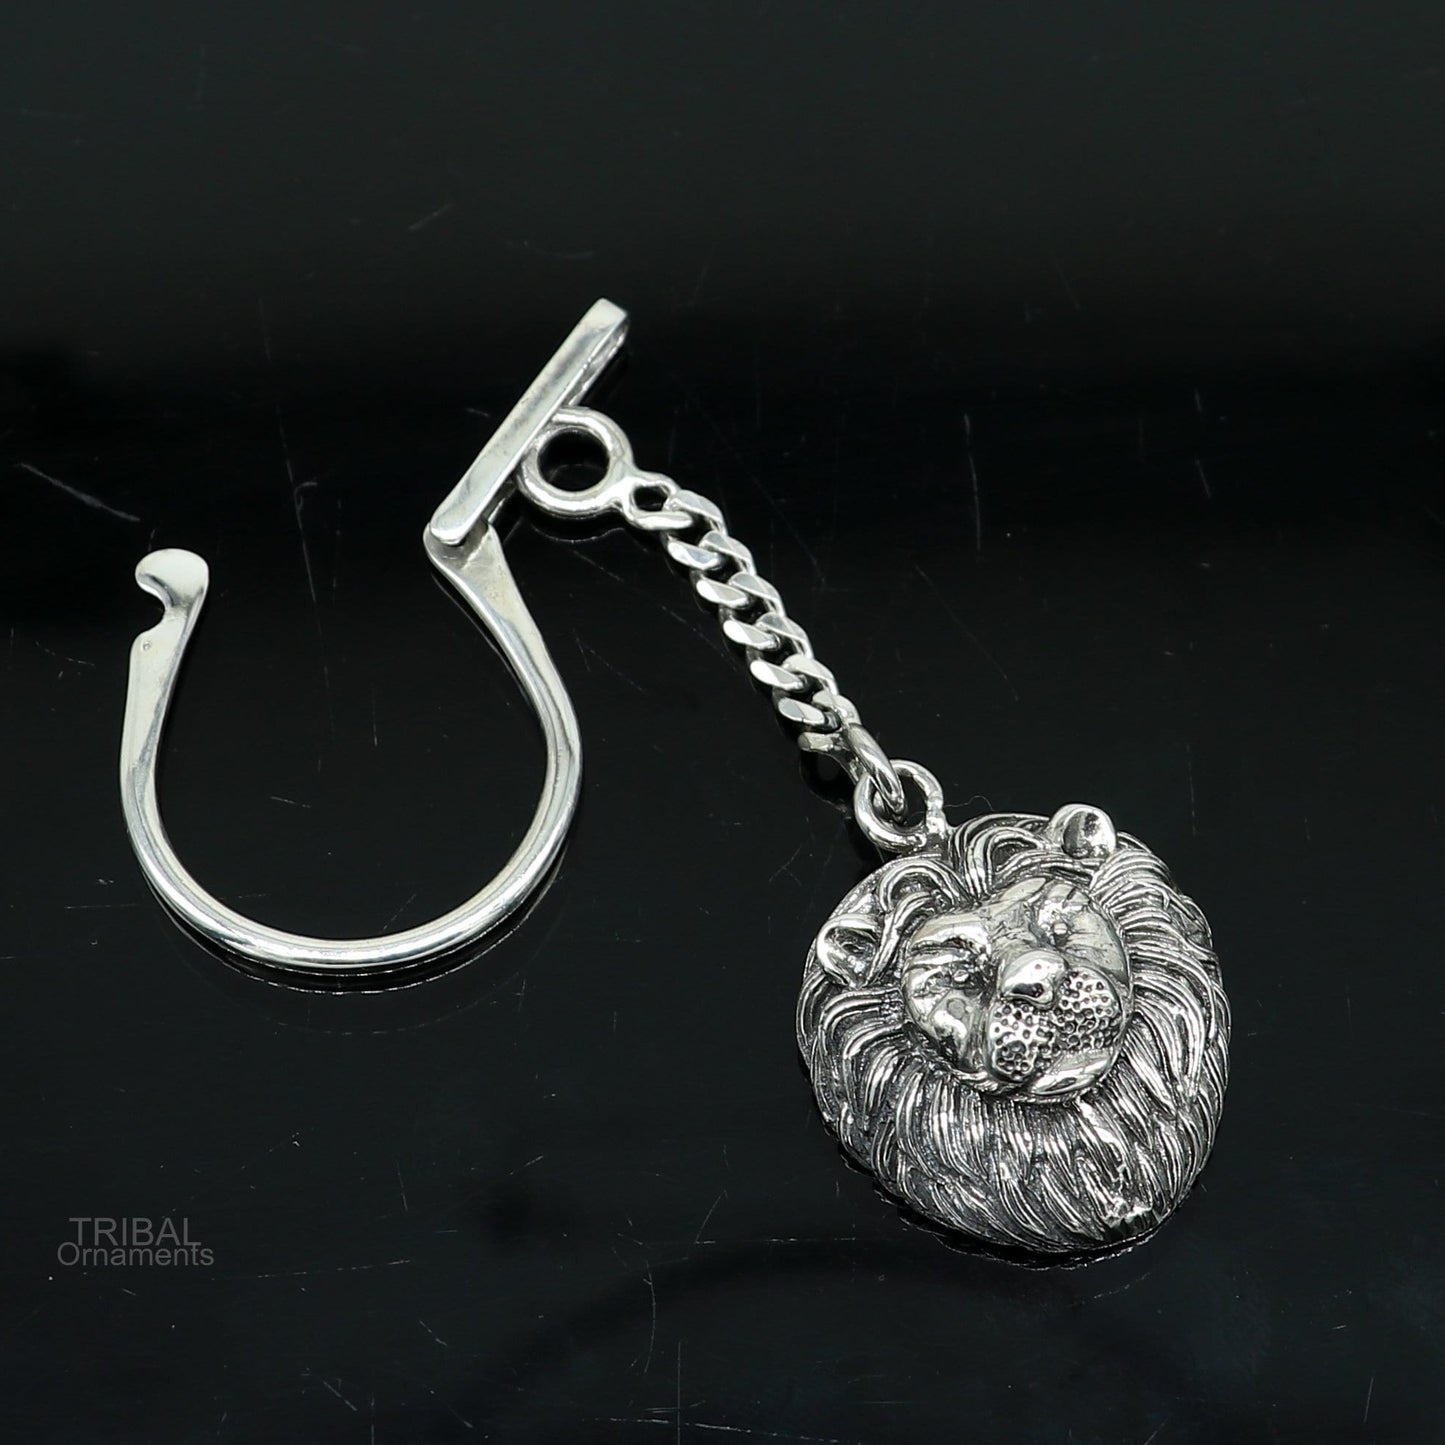 Vintage design handmade 925 sterling silver key chain, silver lion key chain, best gifting charming key chain jewelry KCH01 - TRIBAL ORNAMENTS